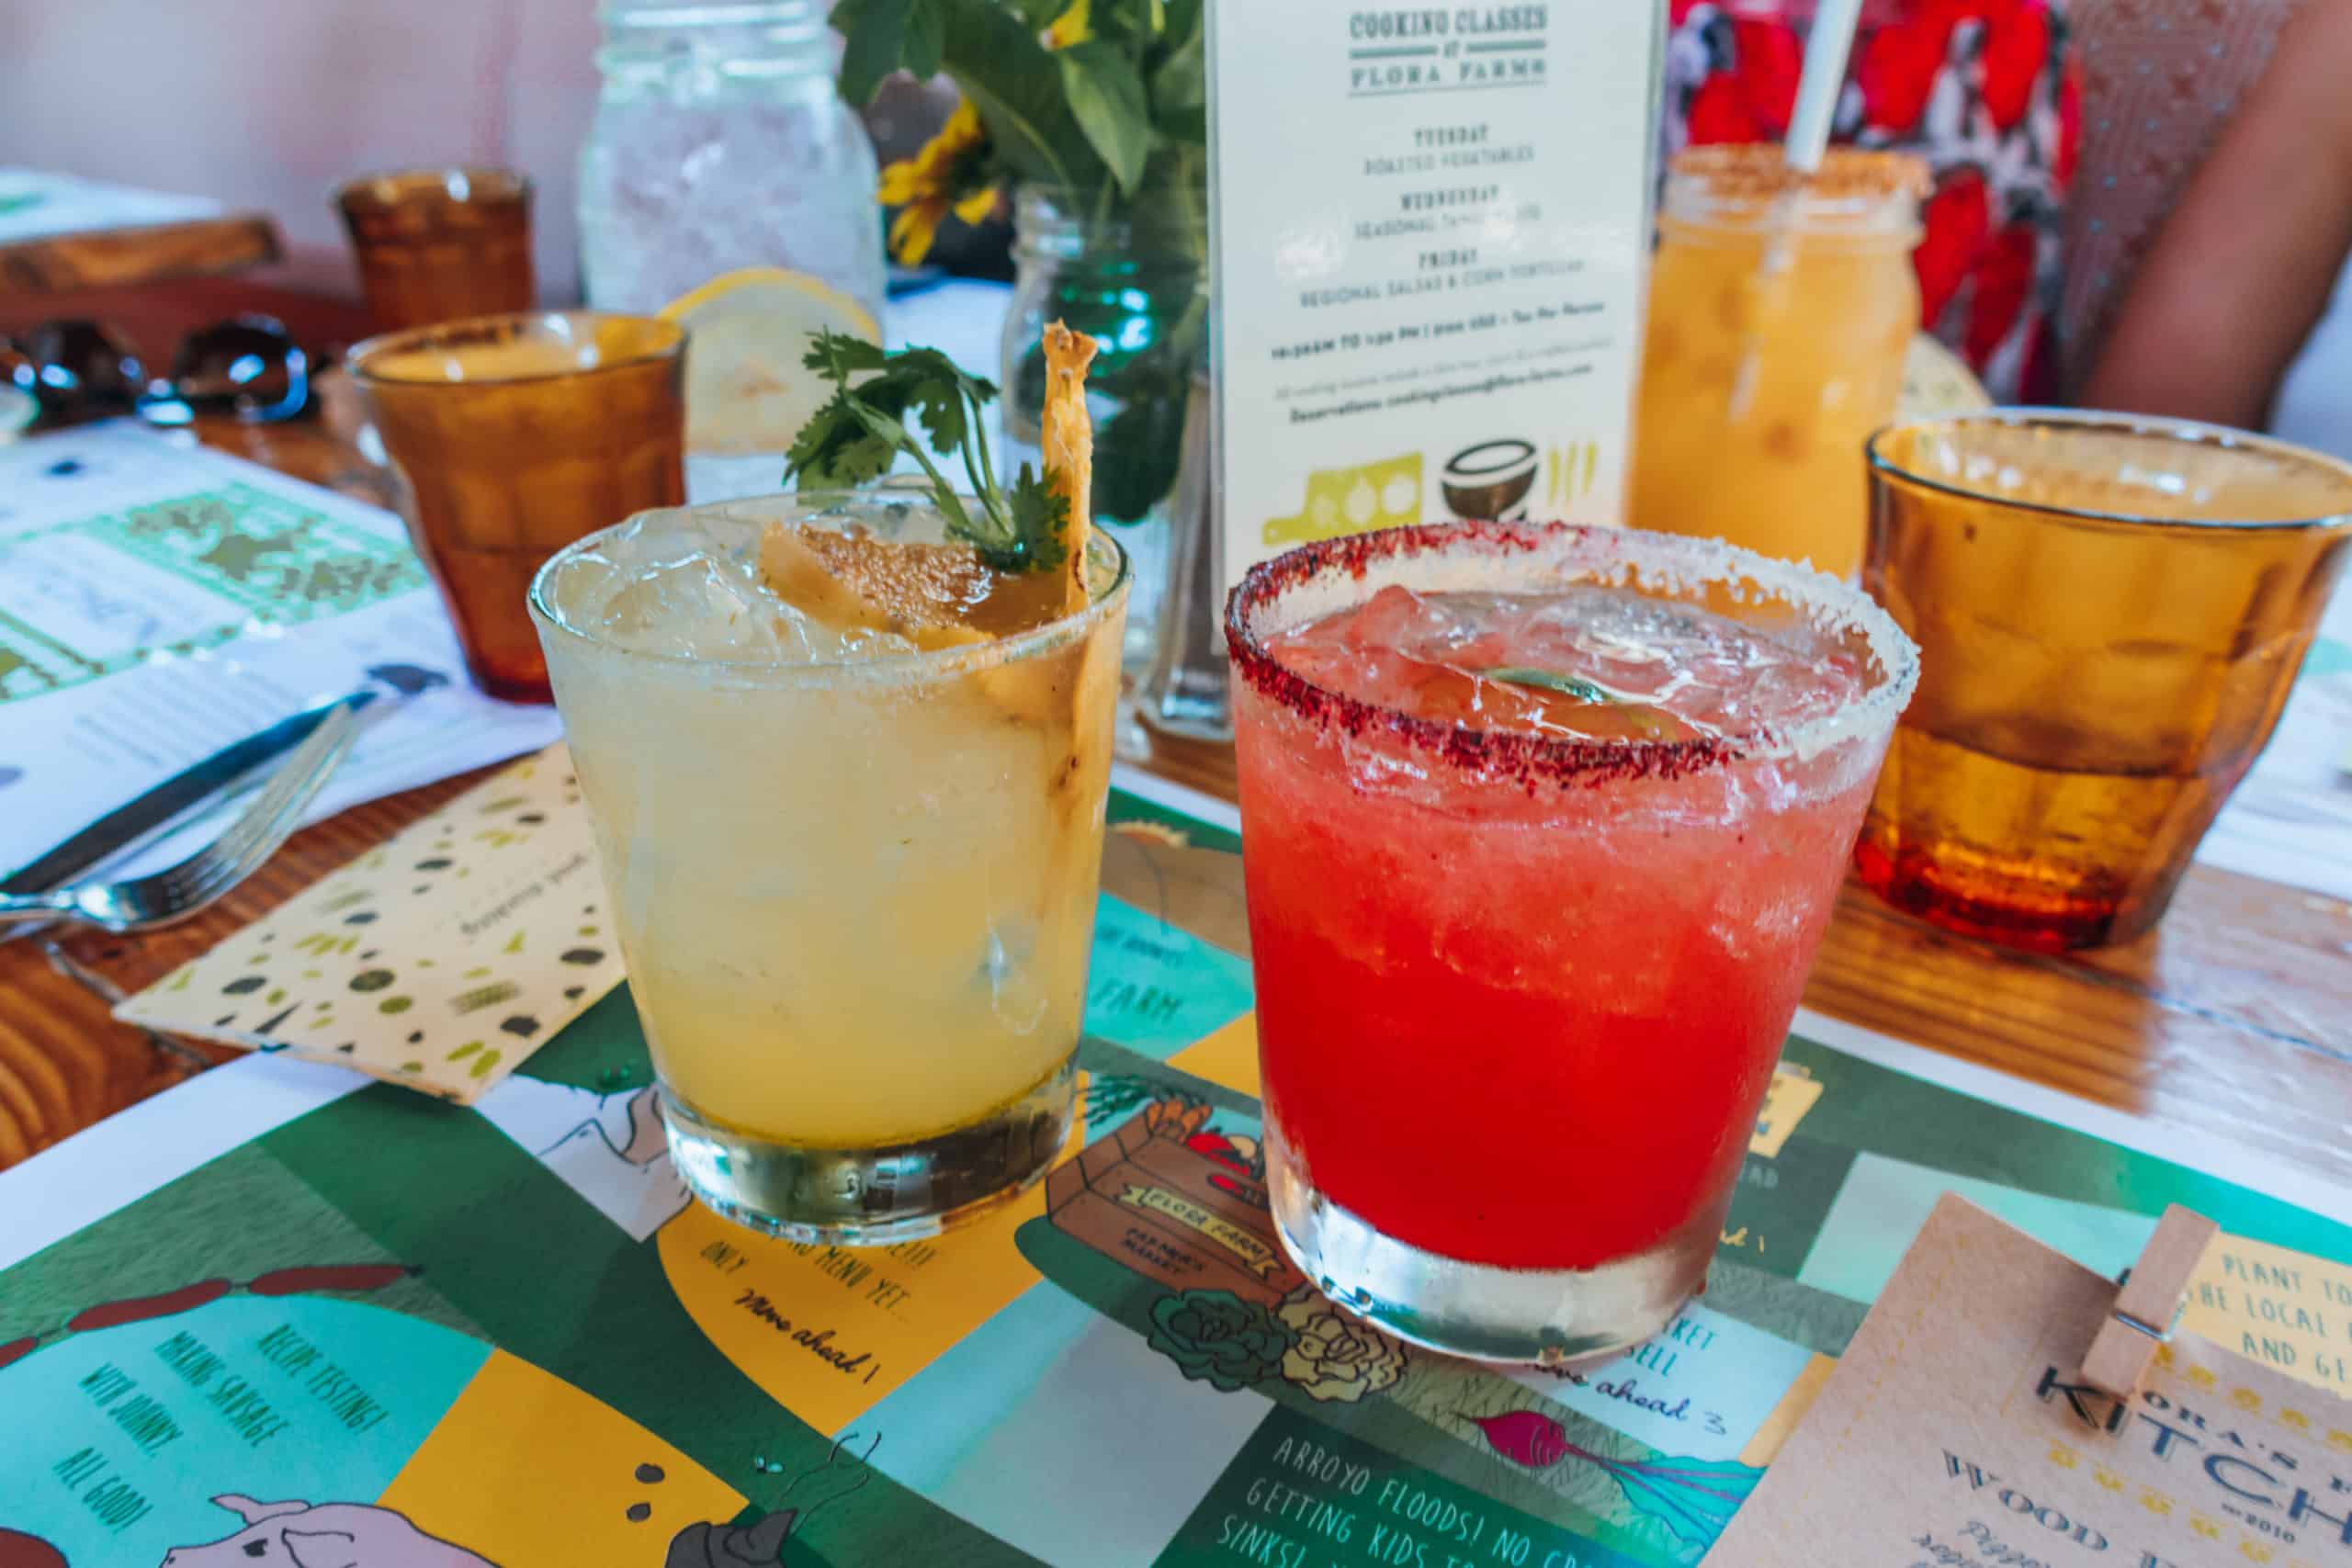 Cocktails at Flora Farms in Cabo, Mexico